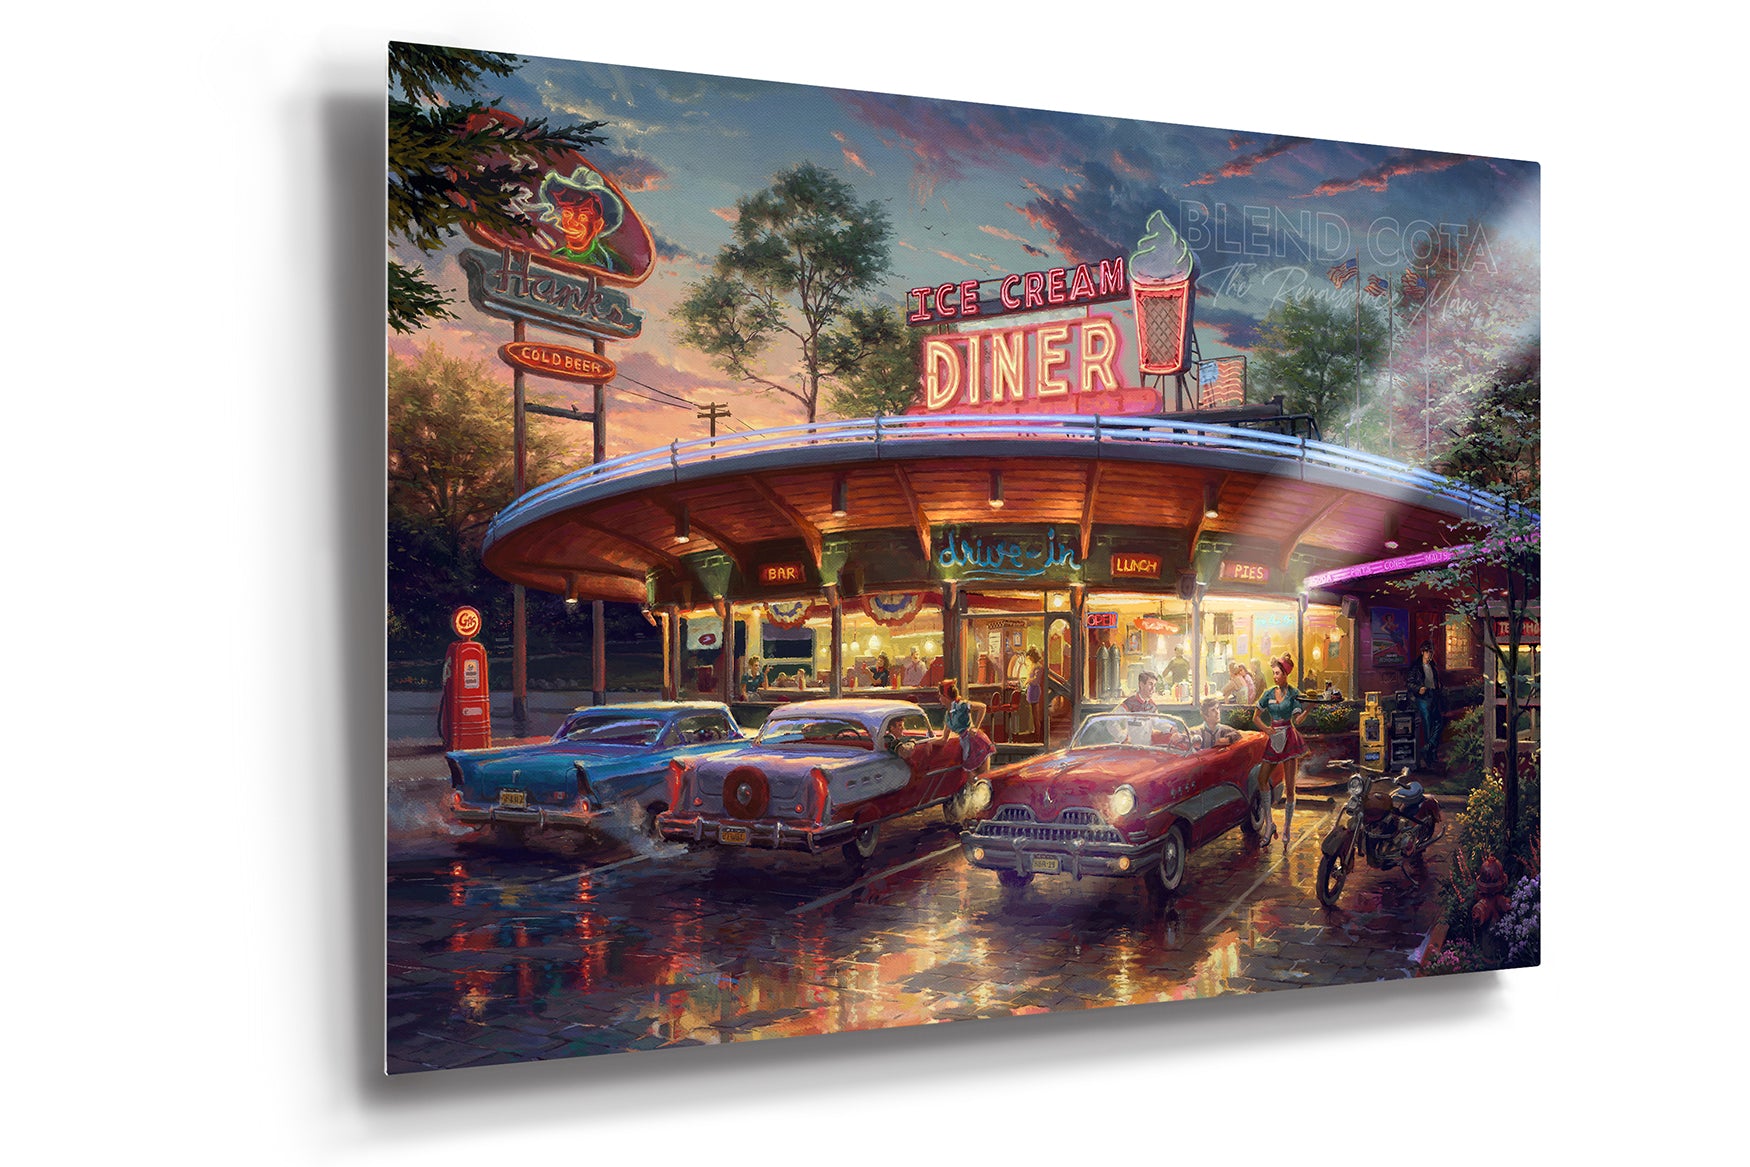 Meet You At The Diner - Blend Cota Limited Edition Art on Metal - Blend Cota Studios 